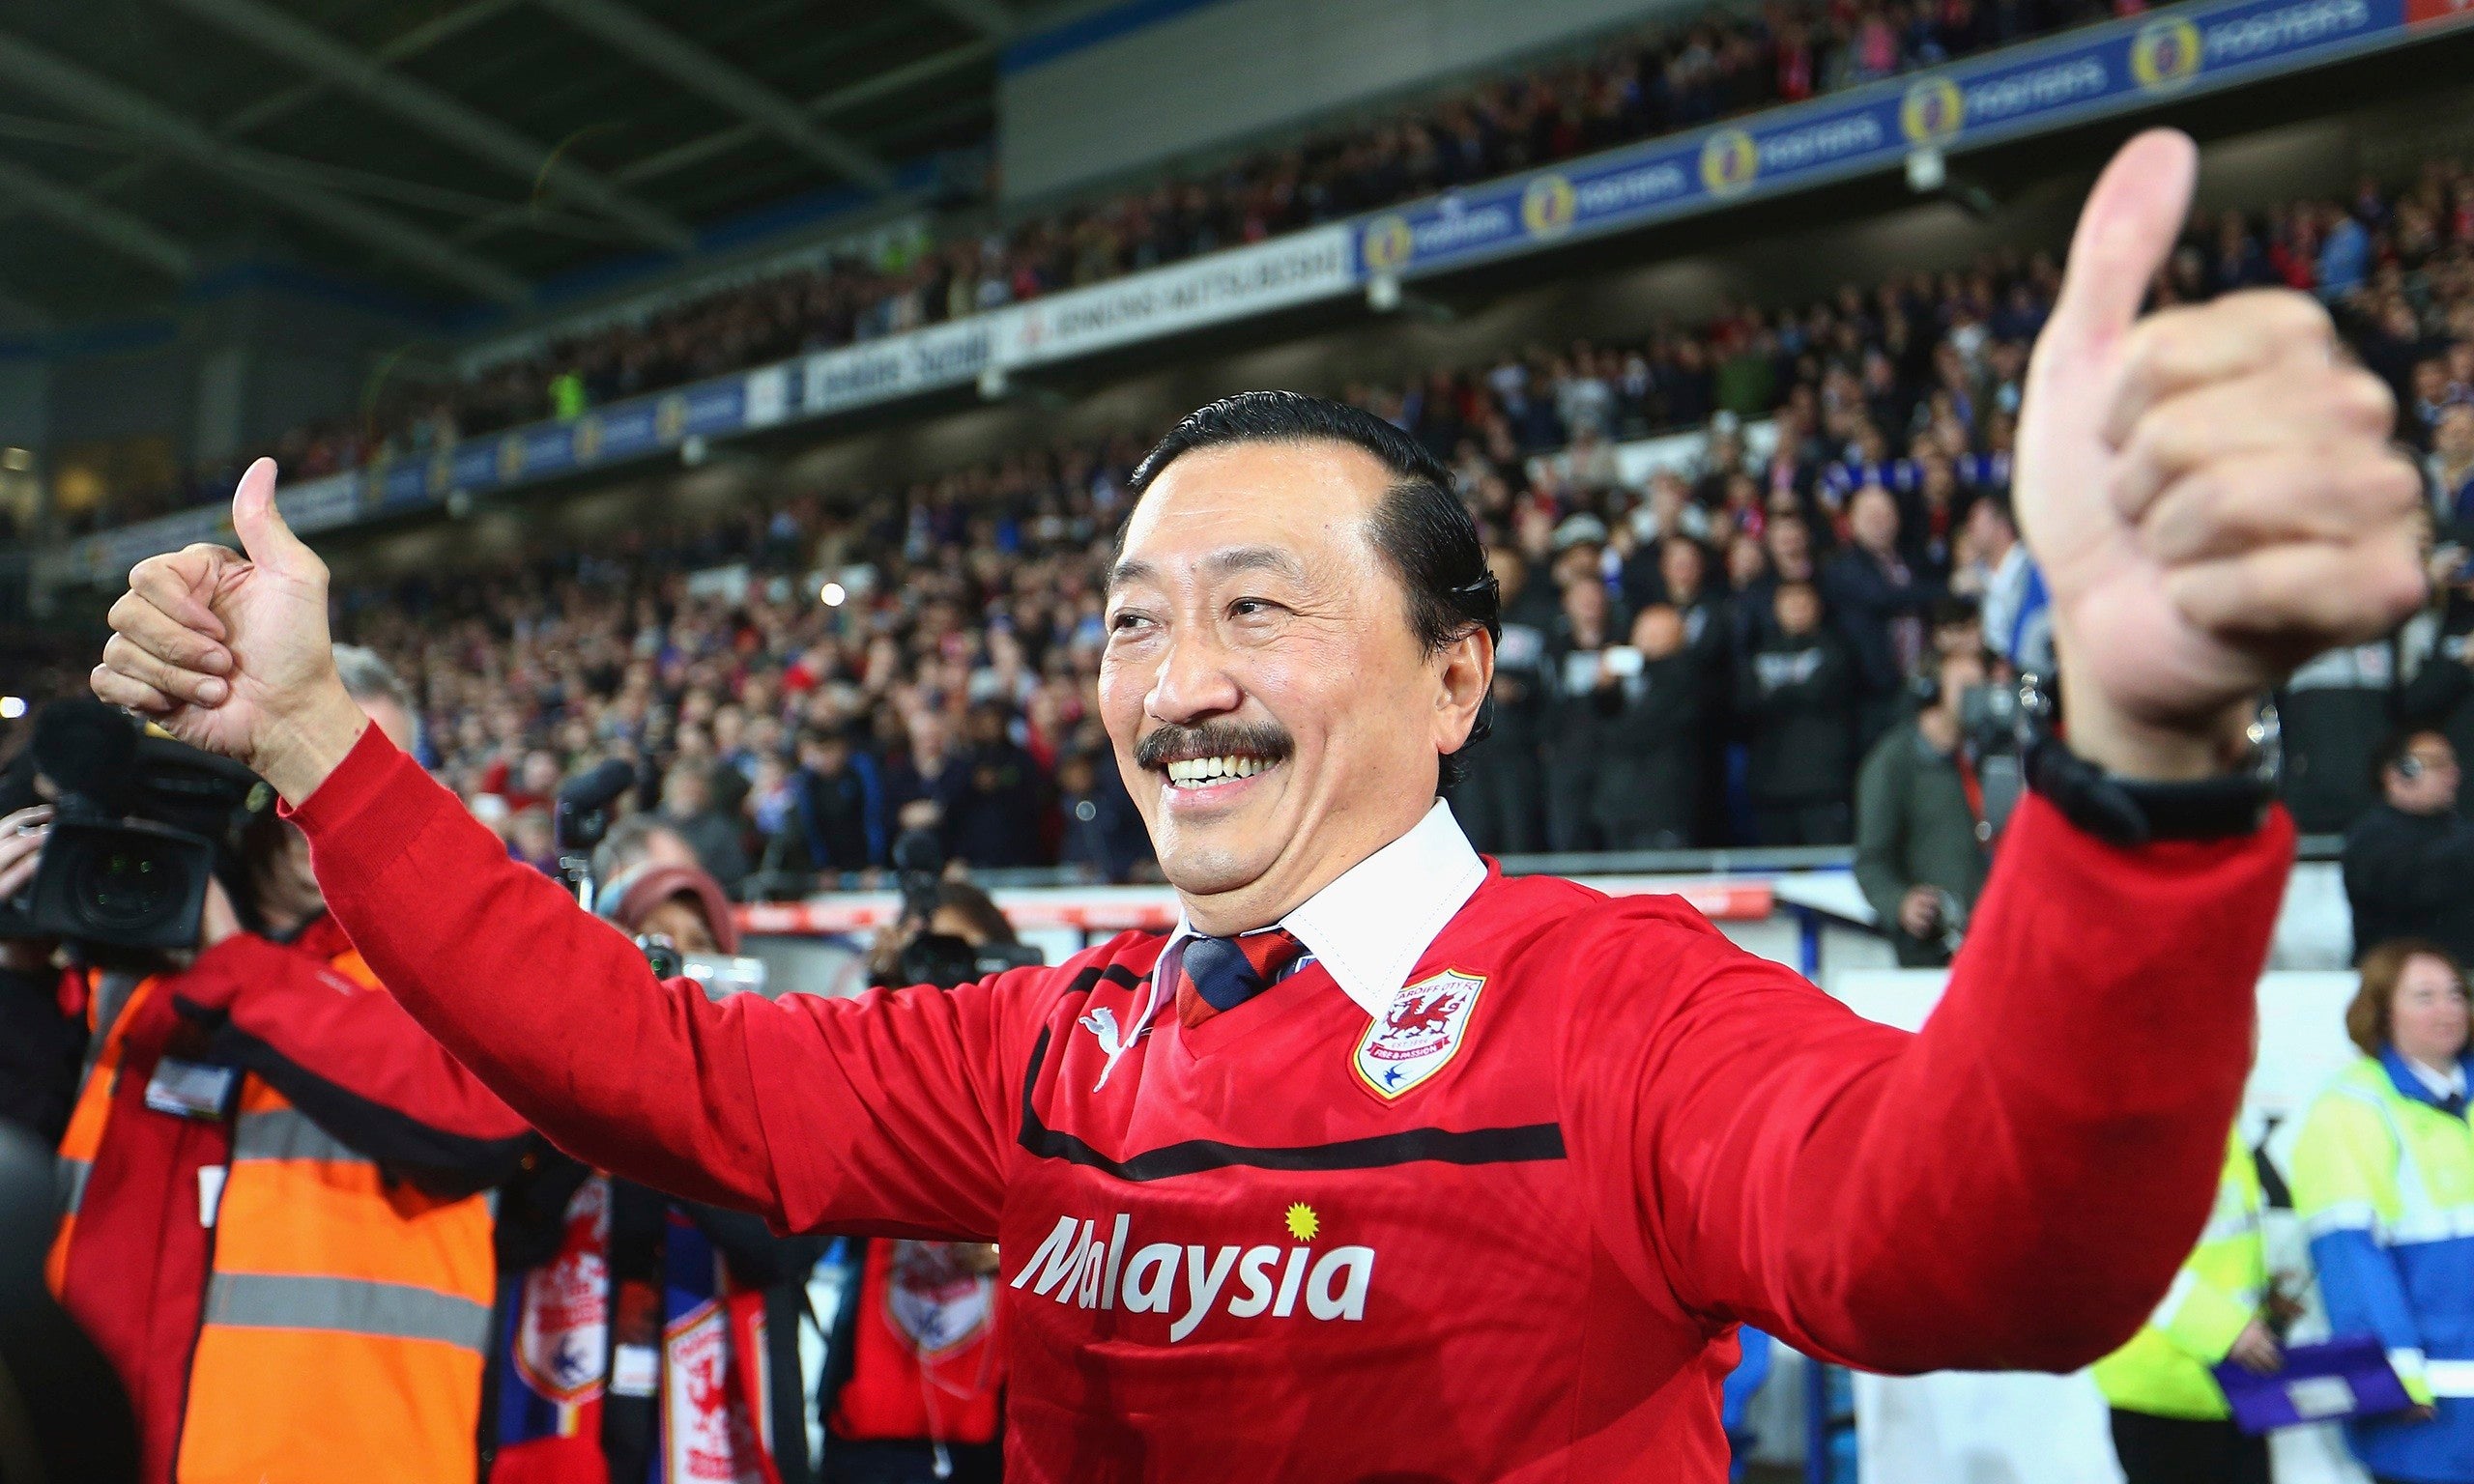 Tan Sri Dato Vincent Tan Wants To Form A 'United States Of Asia' - World Of Buzz